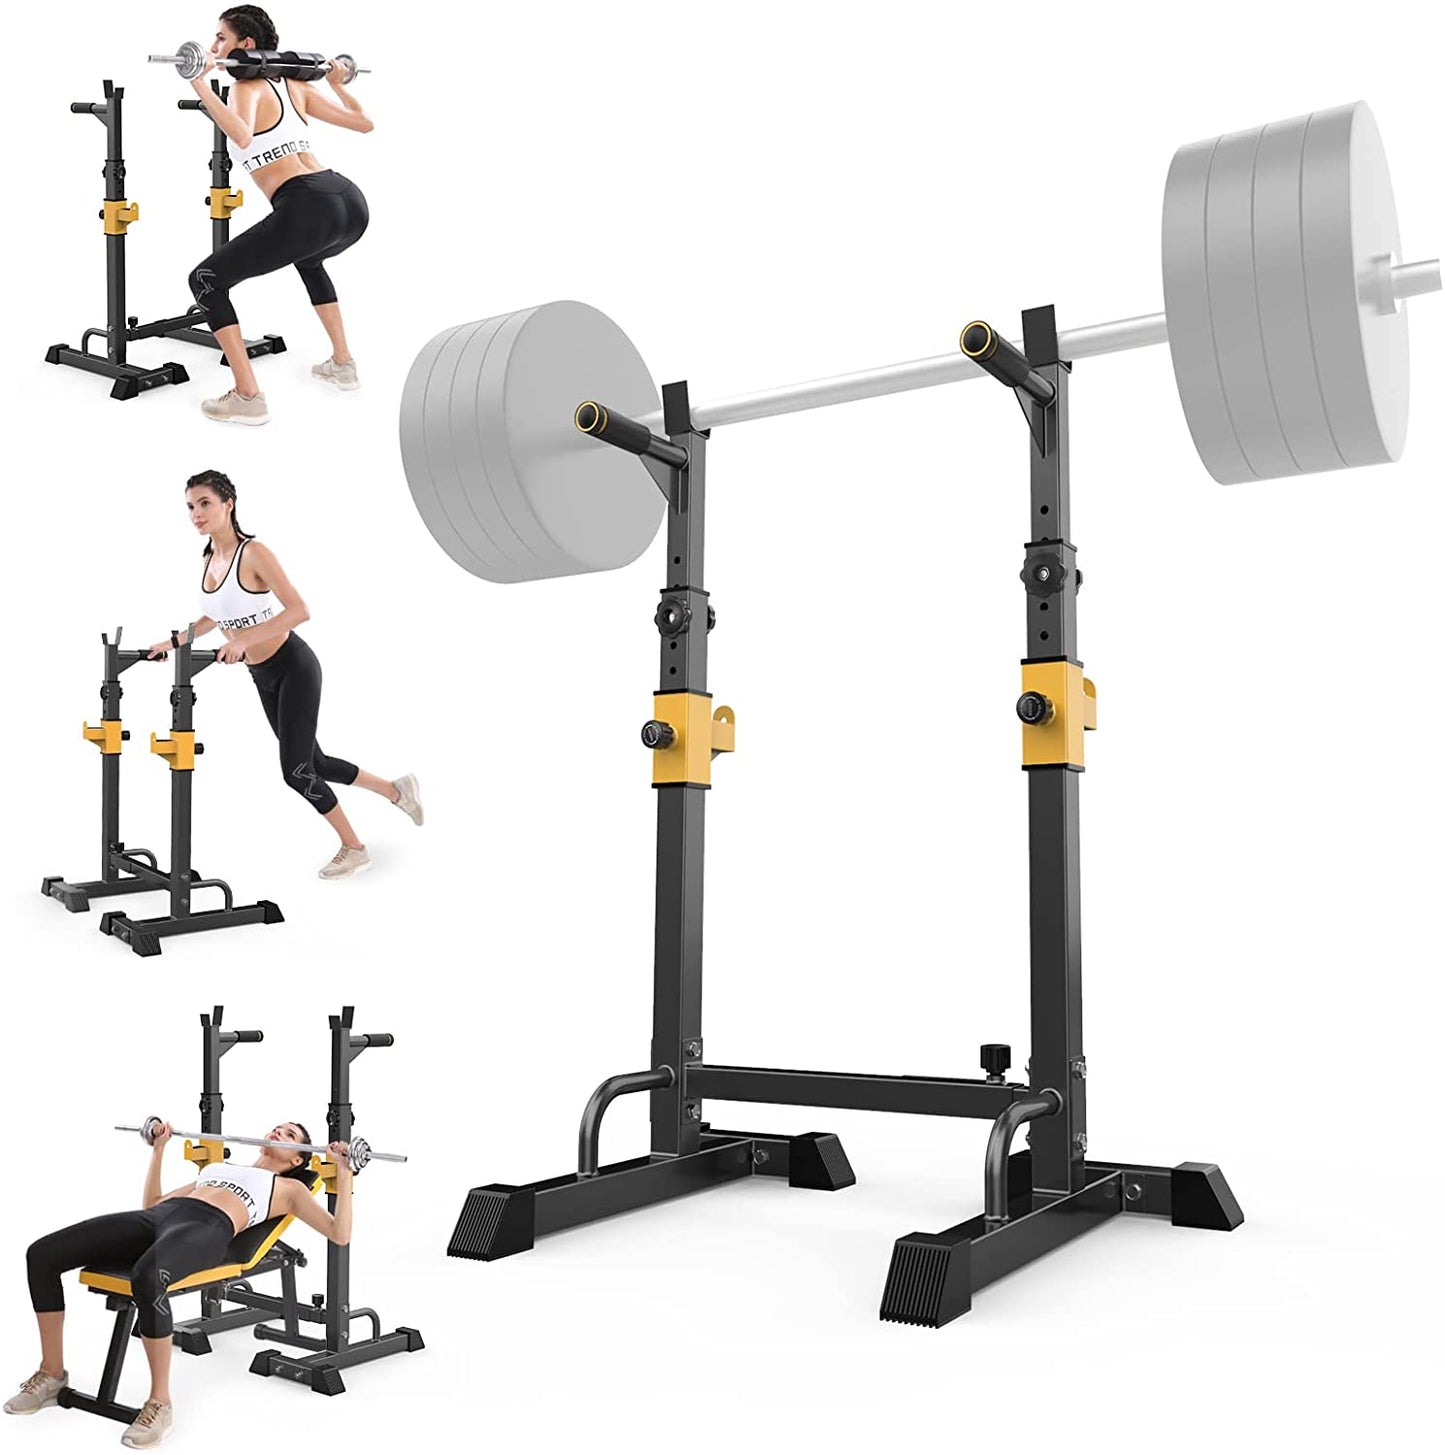 Dripex Squat Rack Stand Home Gym, Adjustable Bench Press Rack, Solid Steel Barbell Rack with Dip Bar Station, Multi-Function Weight Lifting Rack Stand Max 550LBS